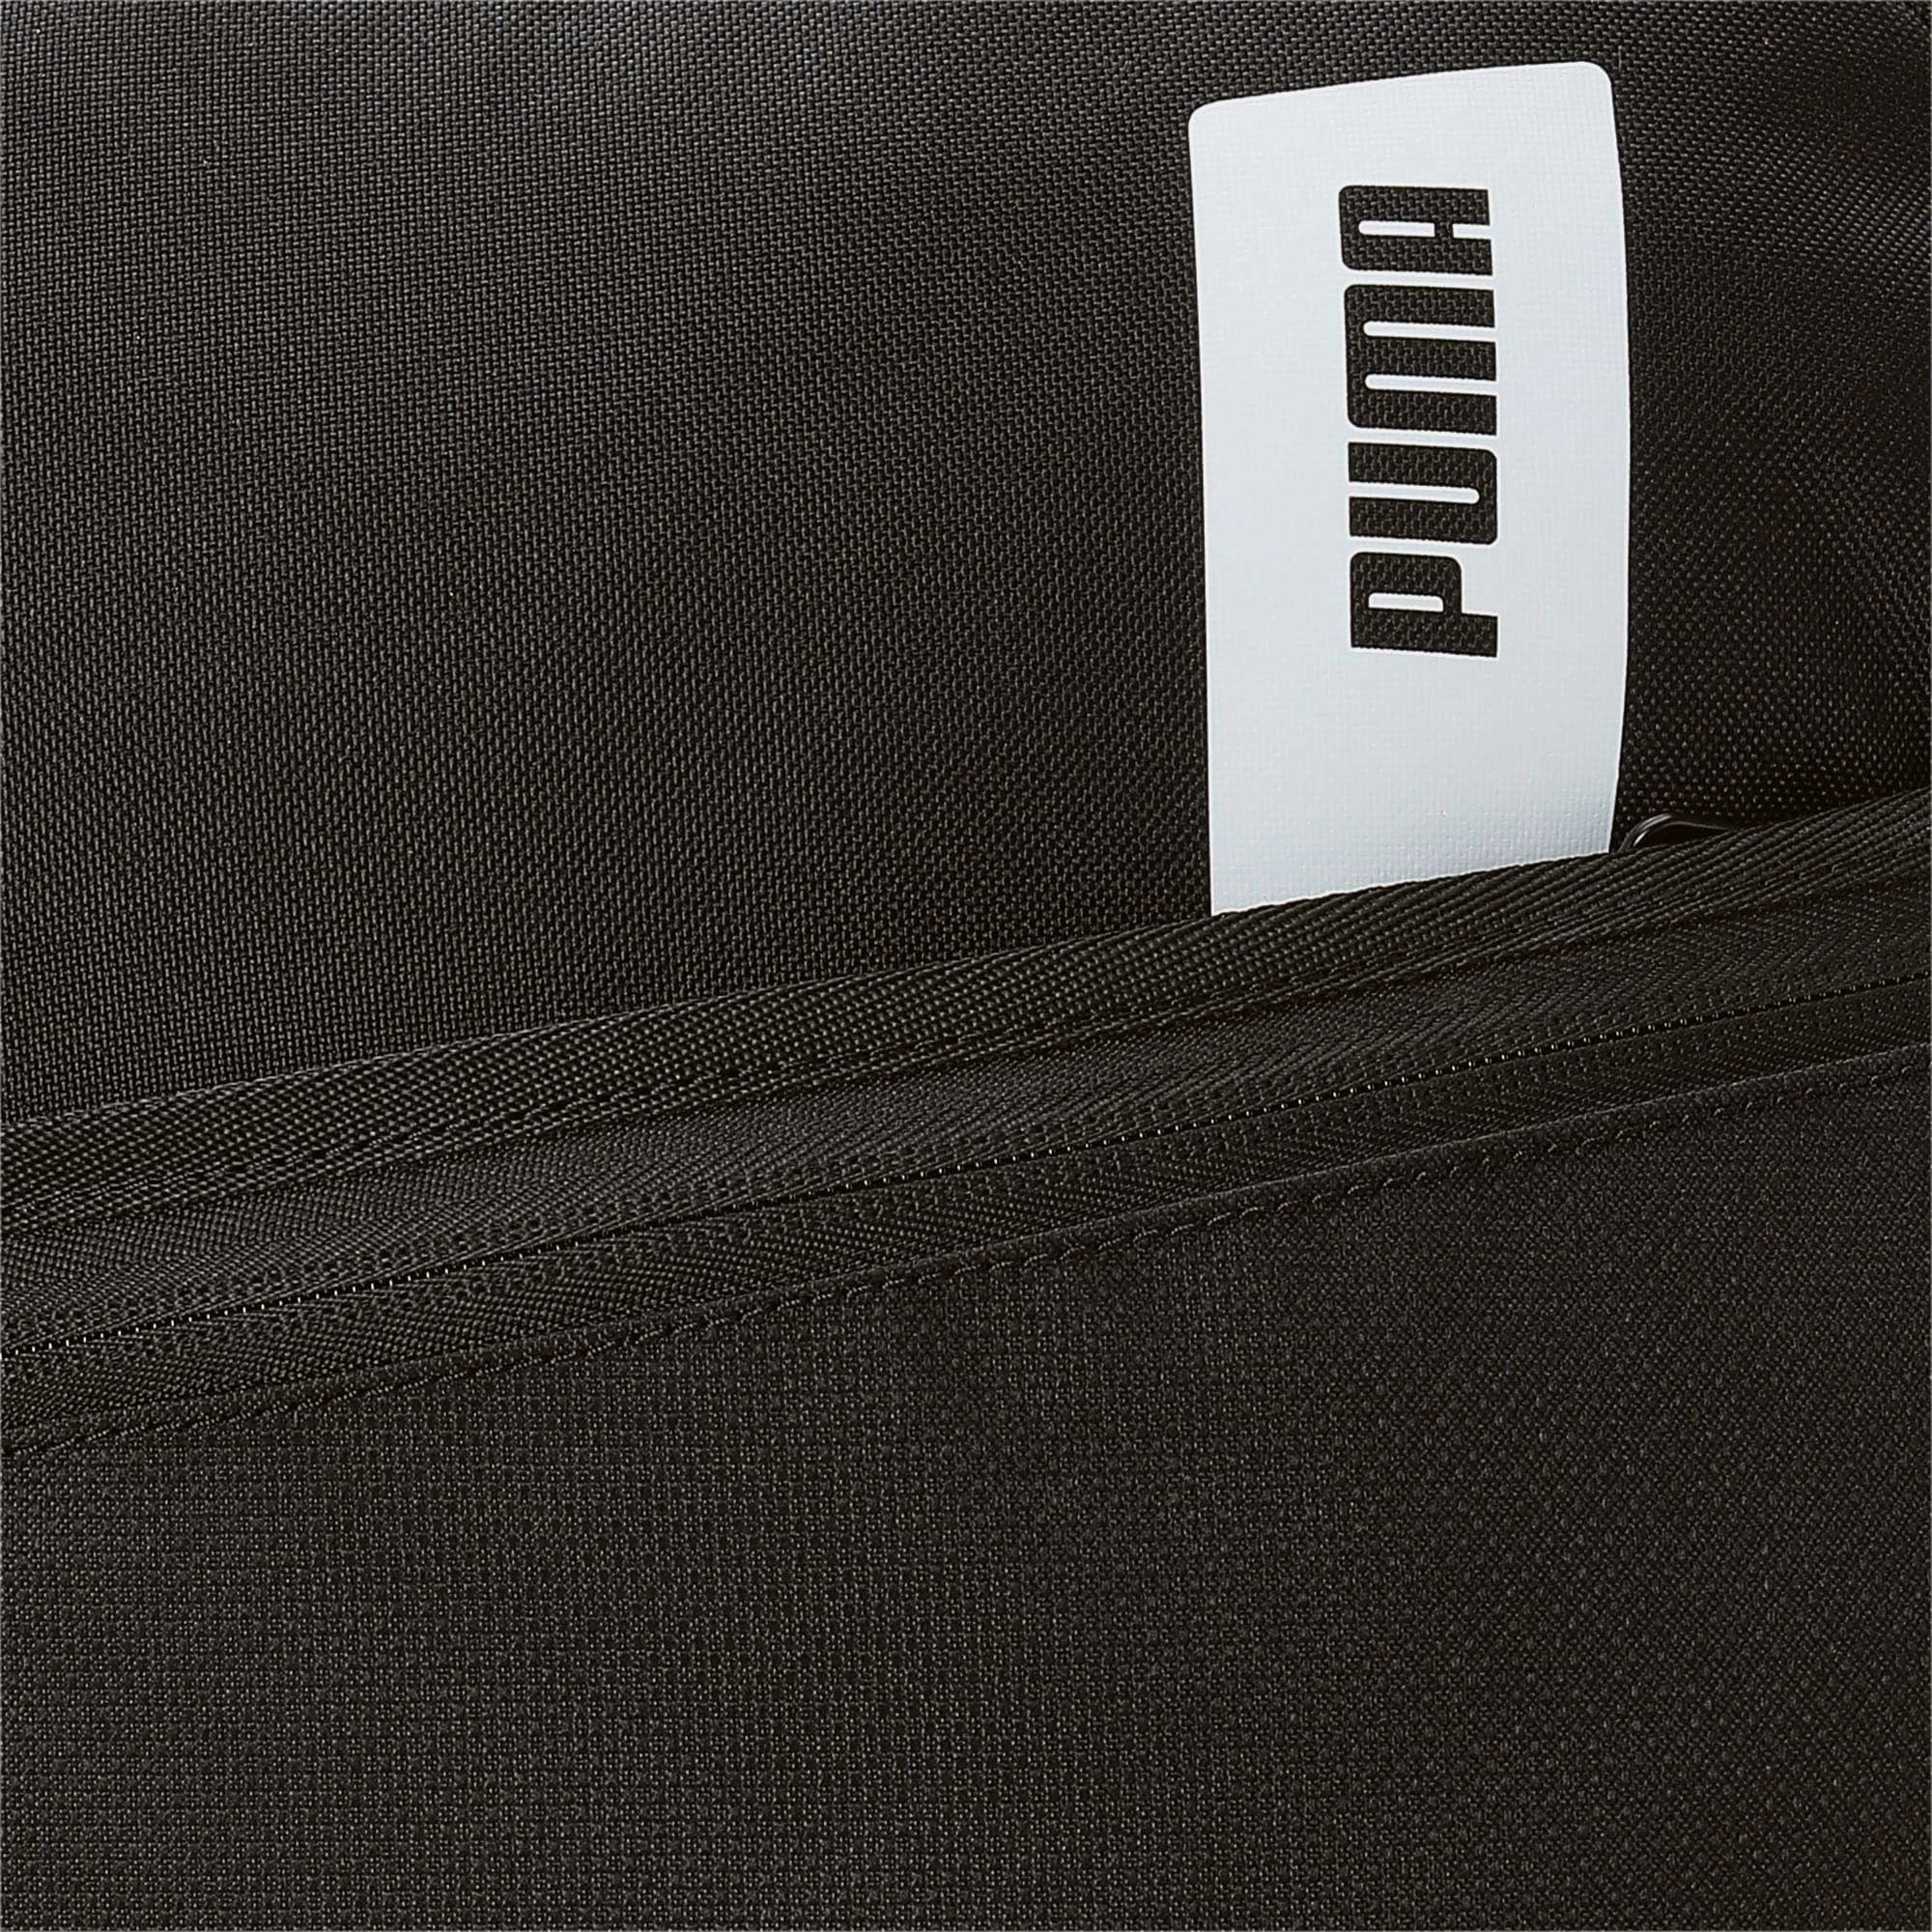 Balo Thể Thao Puma Deck Backpack Ii - Supersports Vietnam